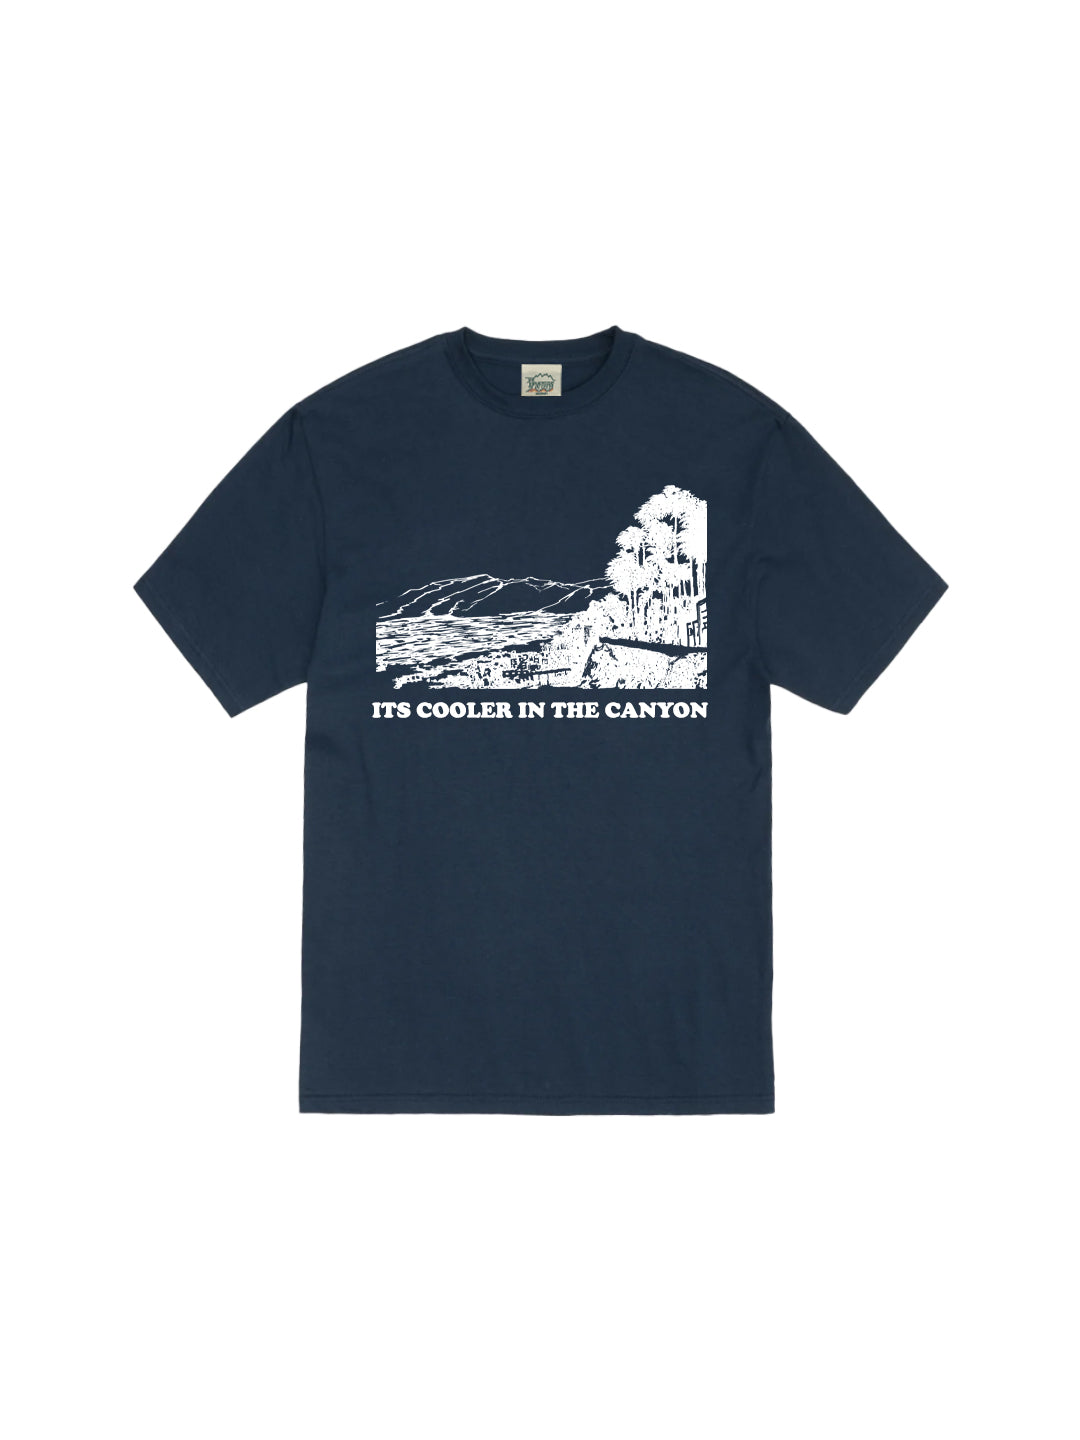 Cooler in the Canyon Adult Tee in Navy